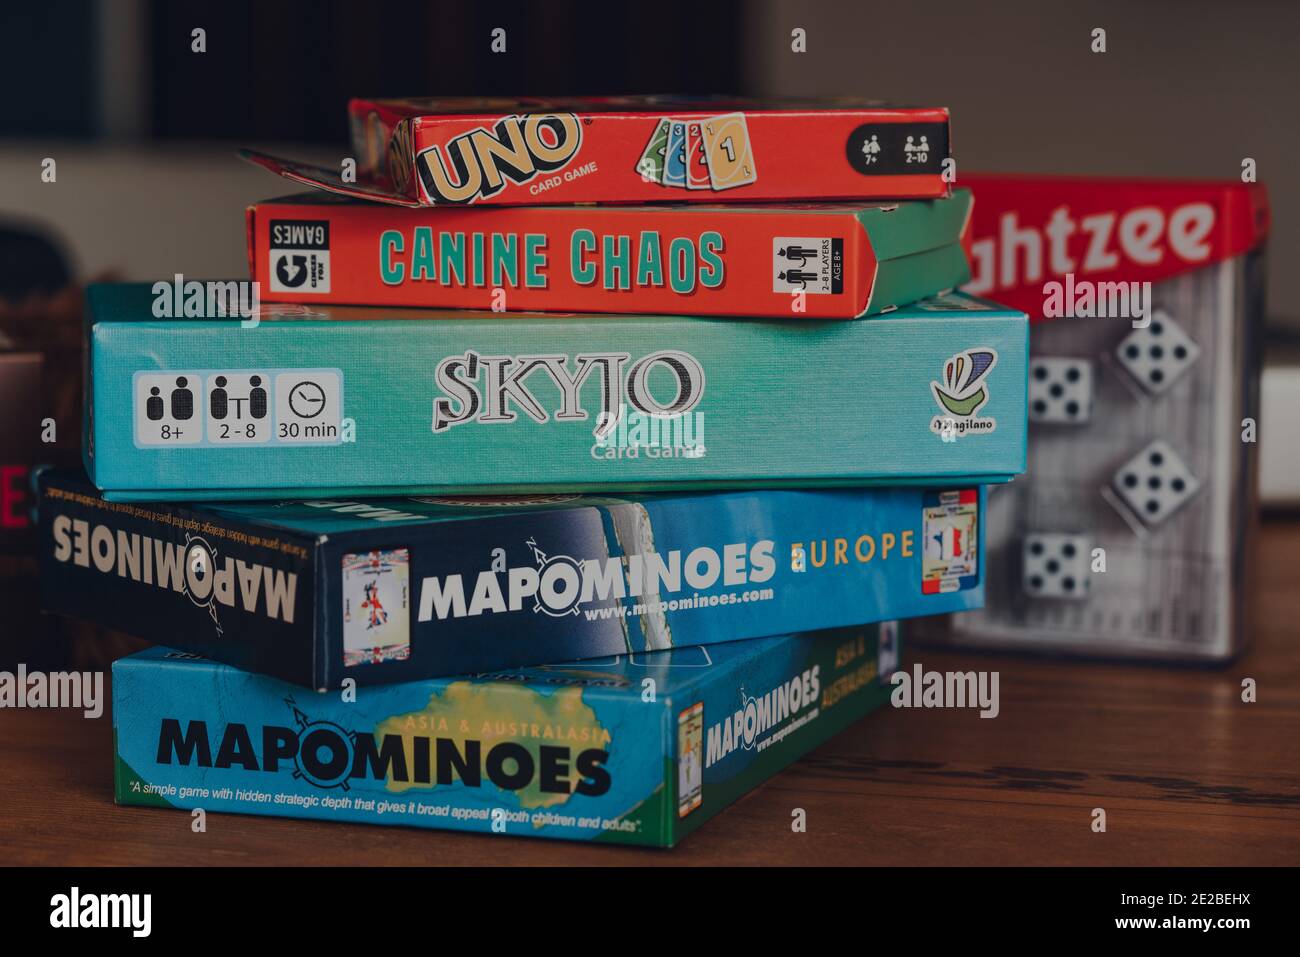 Combe St Nicholas, UK - July 25, 2020: Stack of modern and classing board games on a table. Sales of board games skyrocketed during the Coronavirus pa Stock Photo